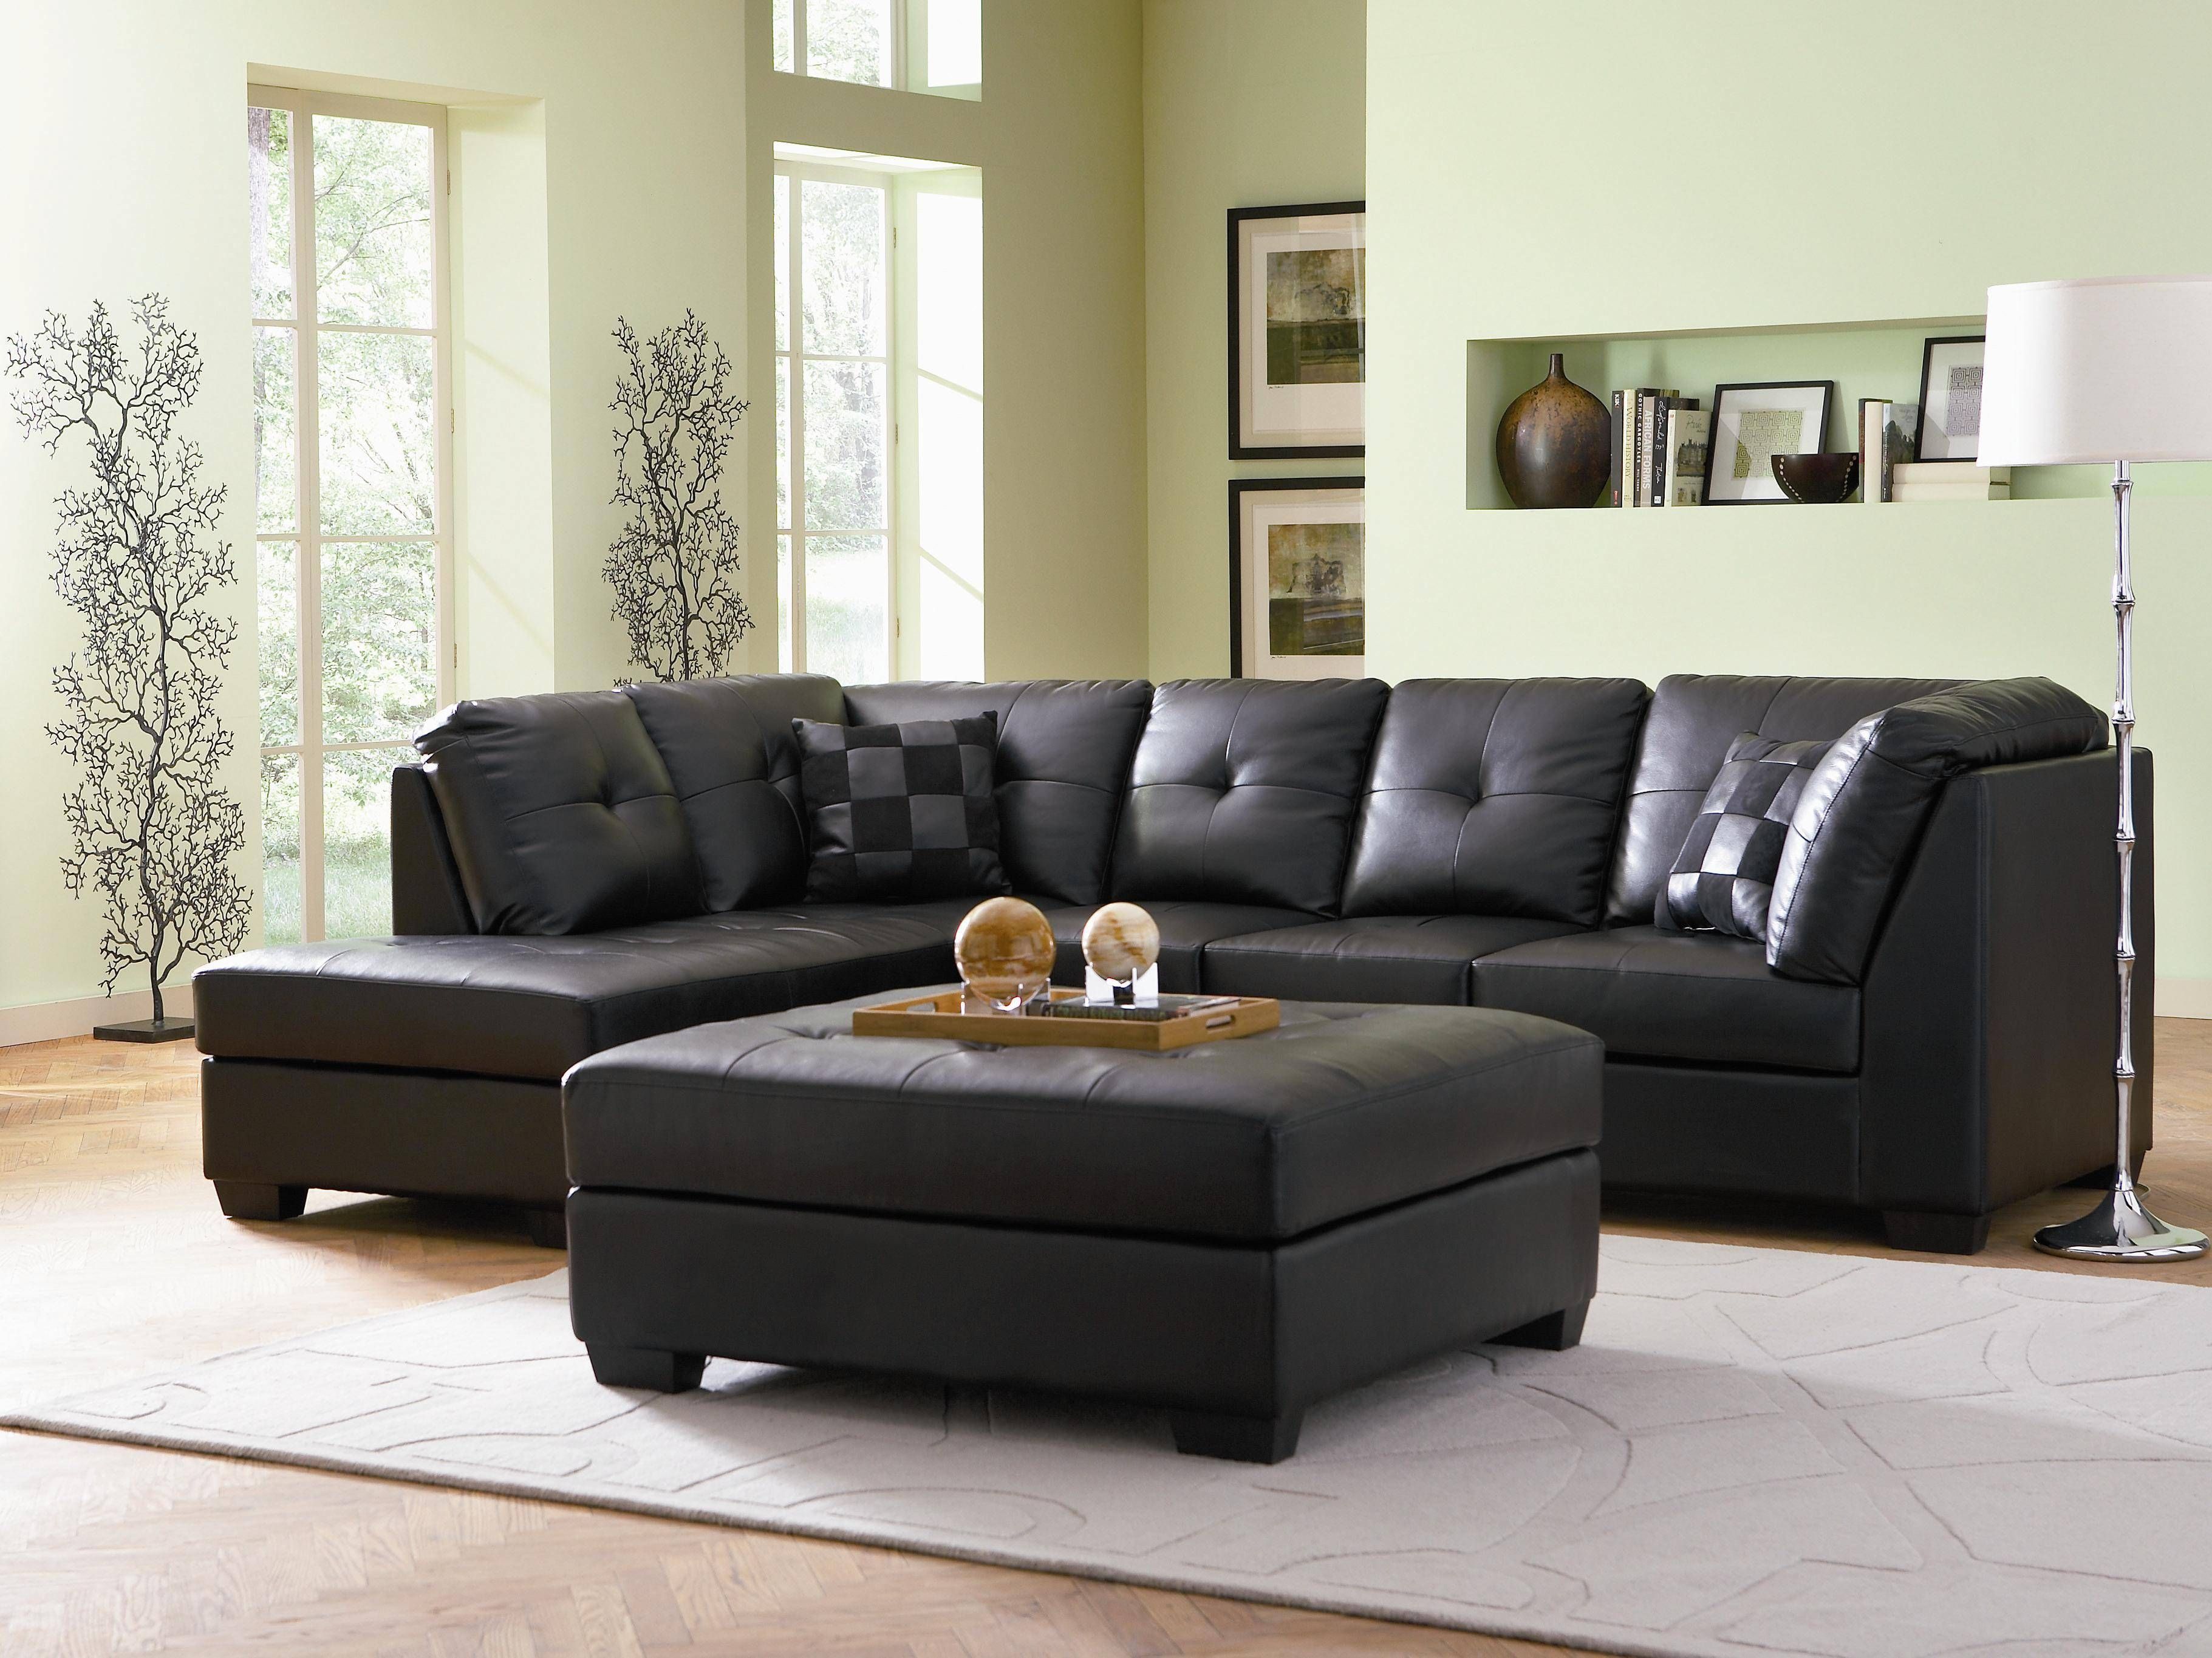 Furniture: Luxury Curved Sectional Sofa For Living Room Furniture Throughout Black And White Sectional Sofa (View 13 of 30)